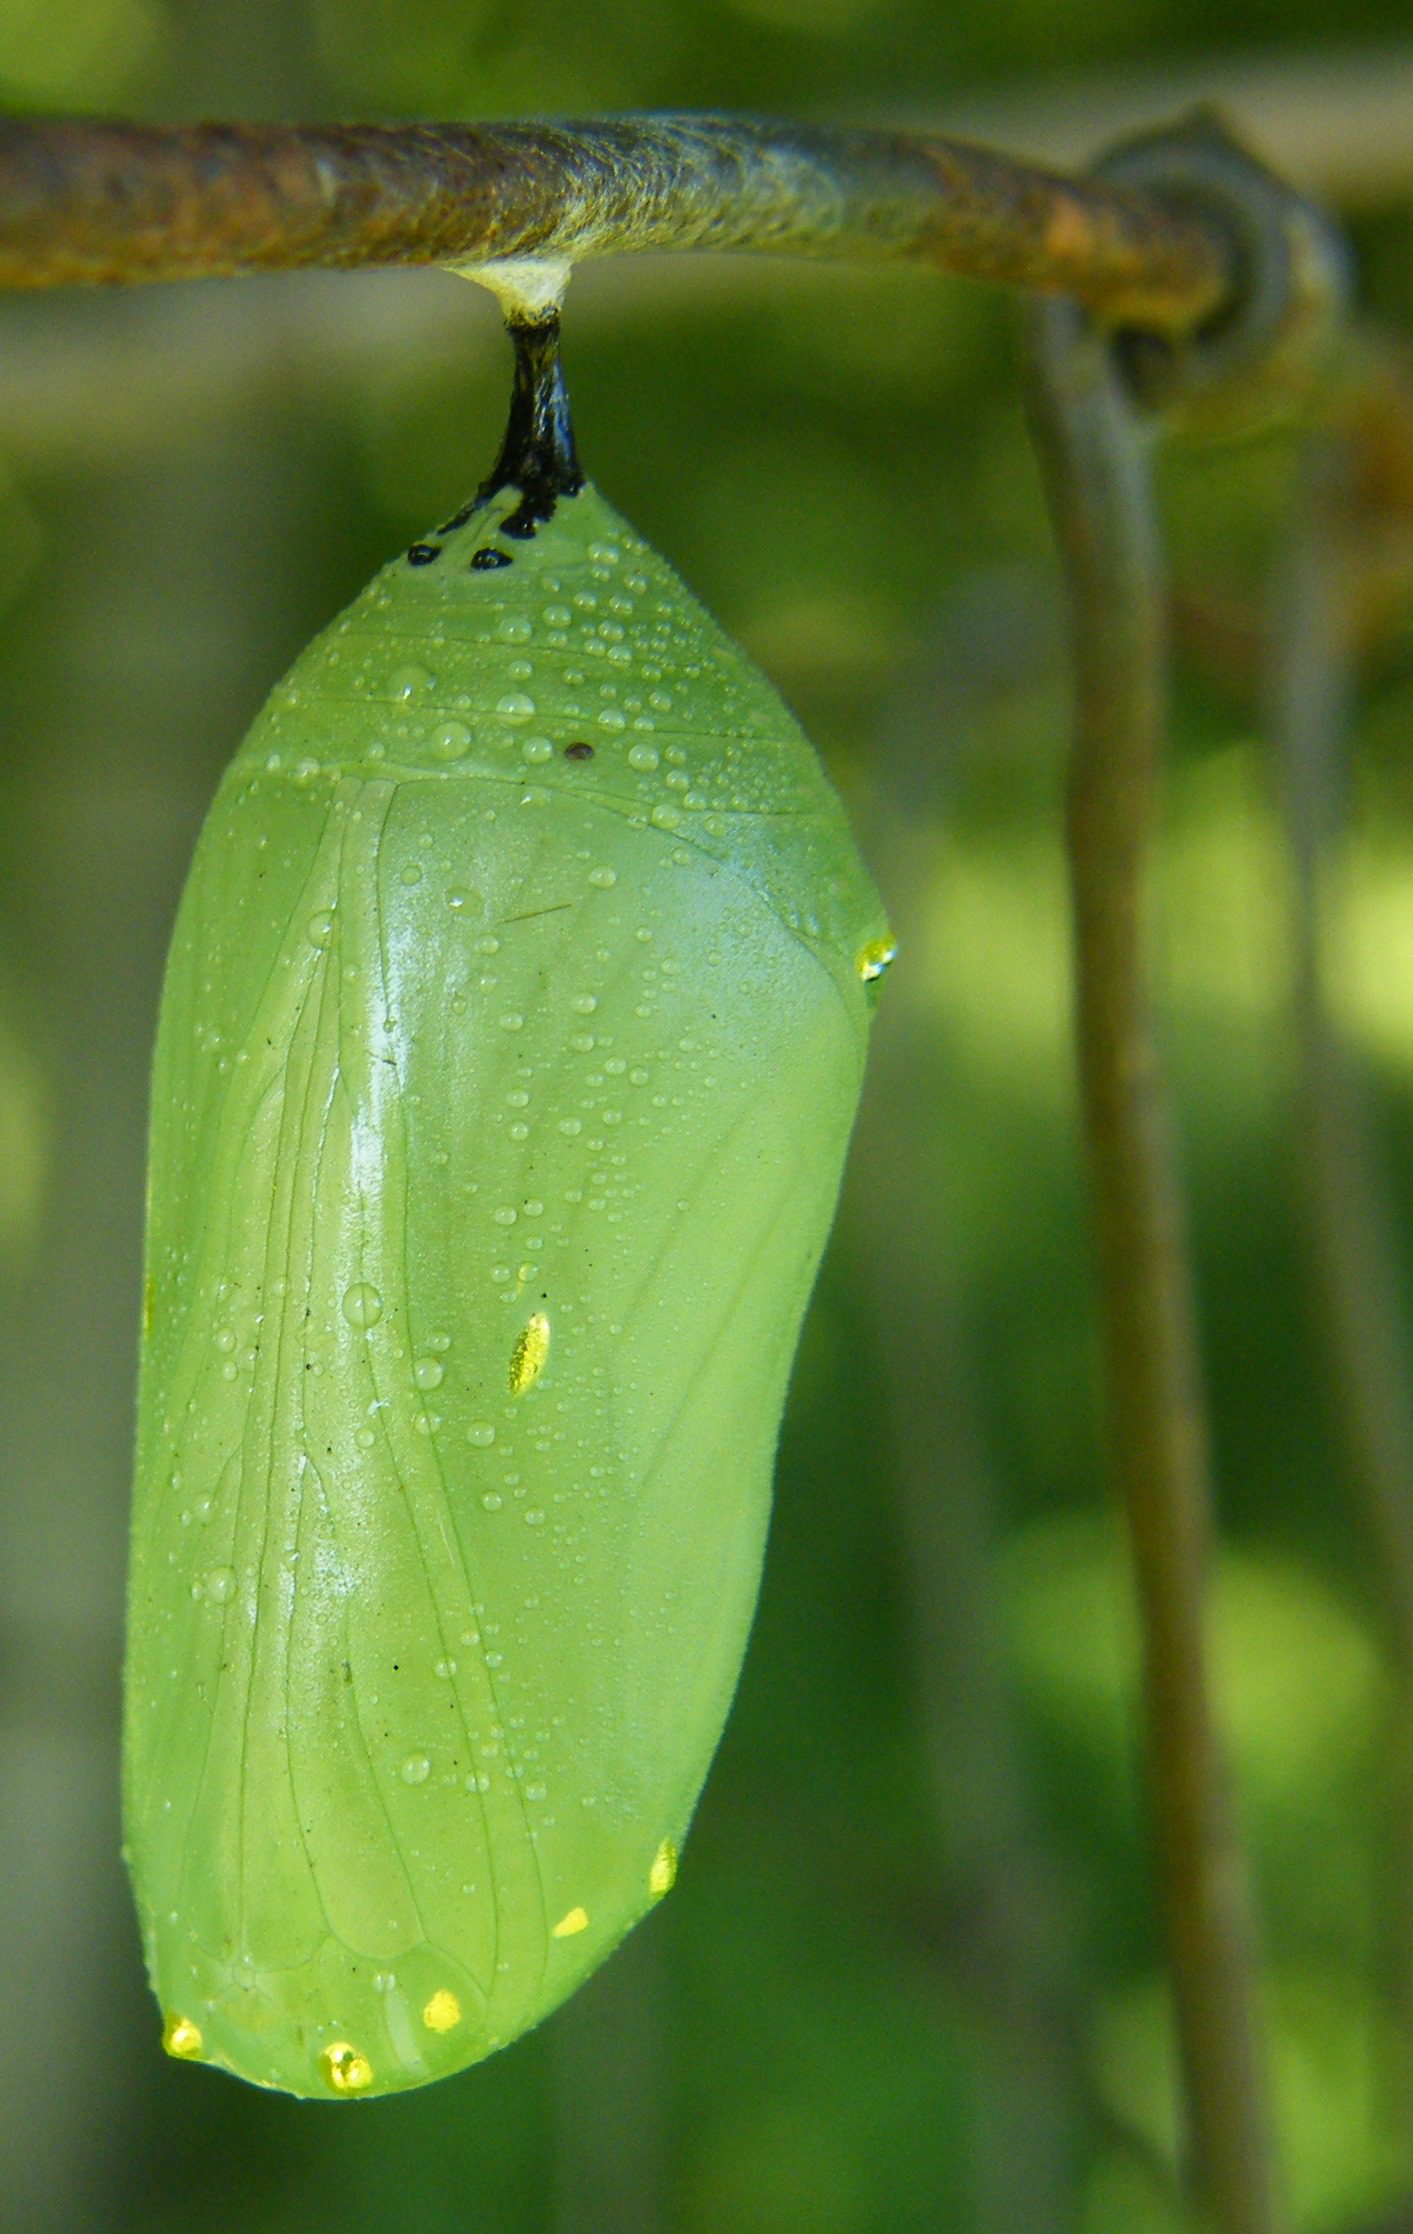 An older chrysalis showing butterfly wings forming within